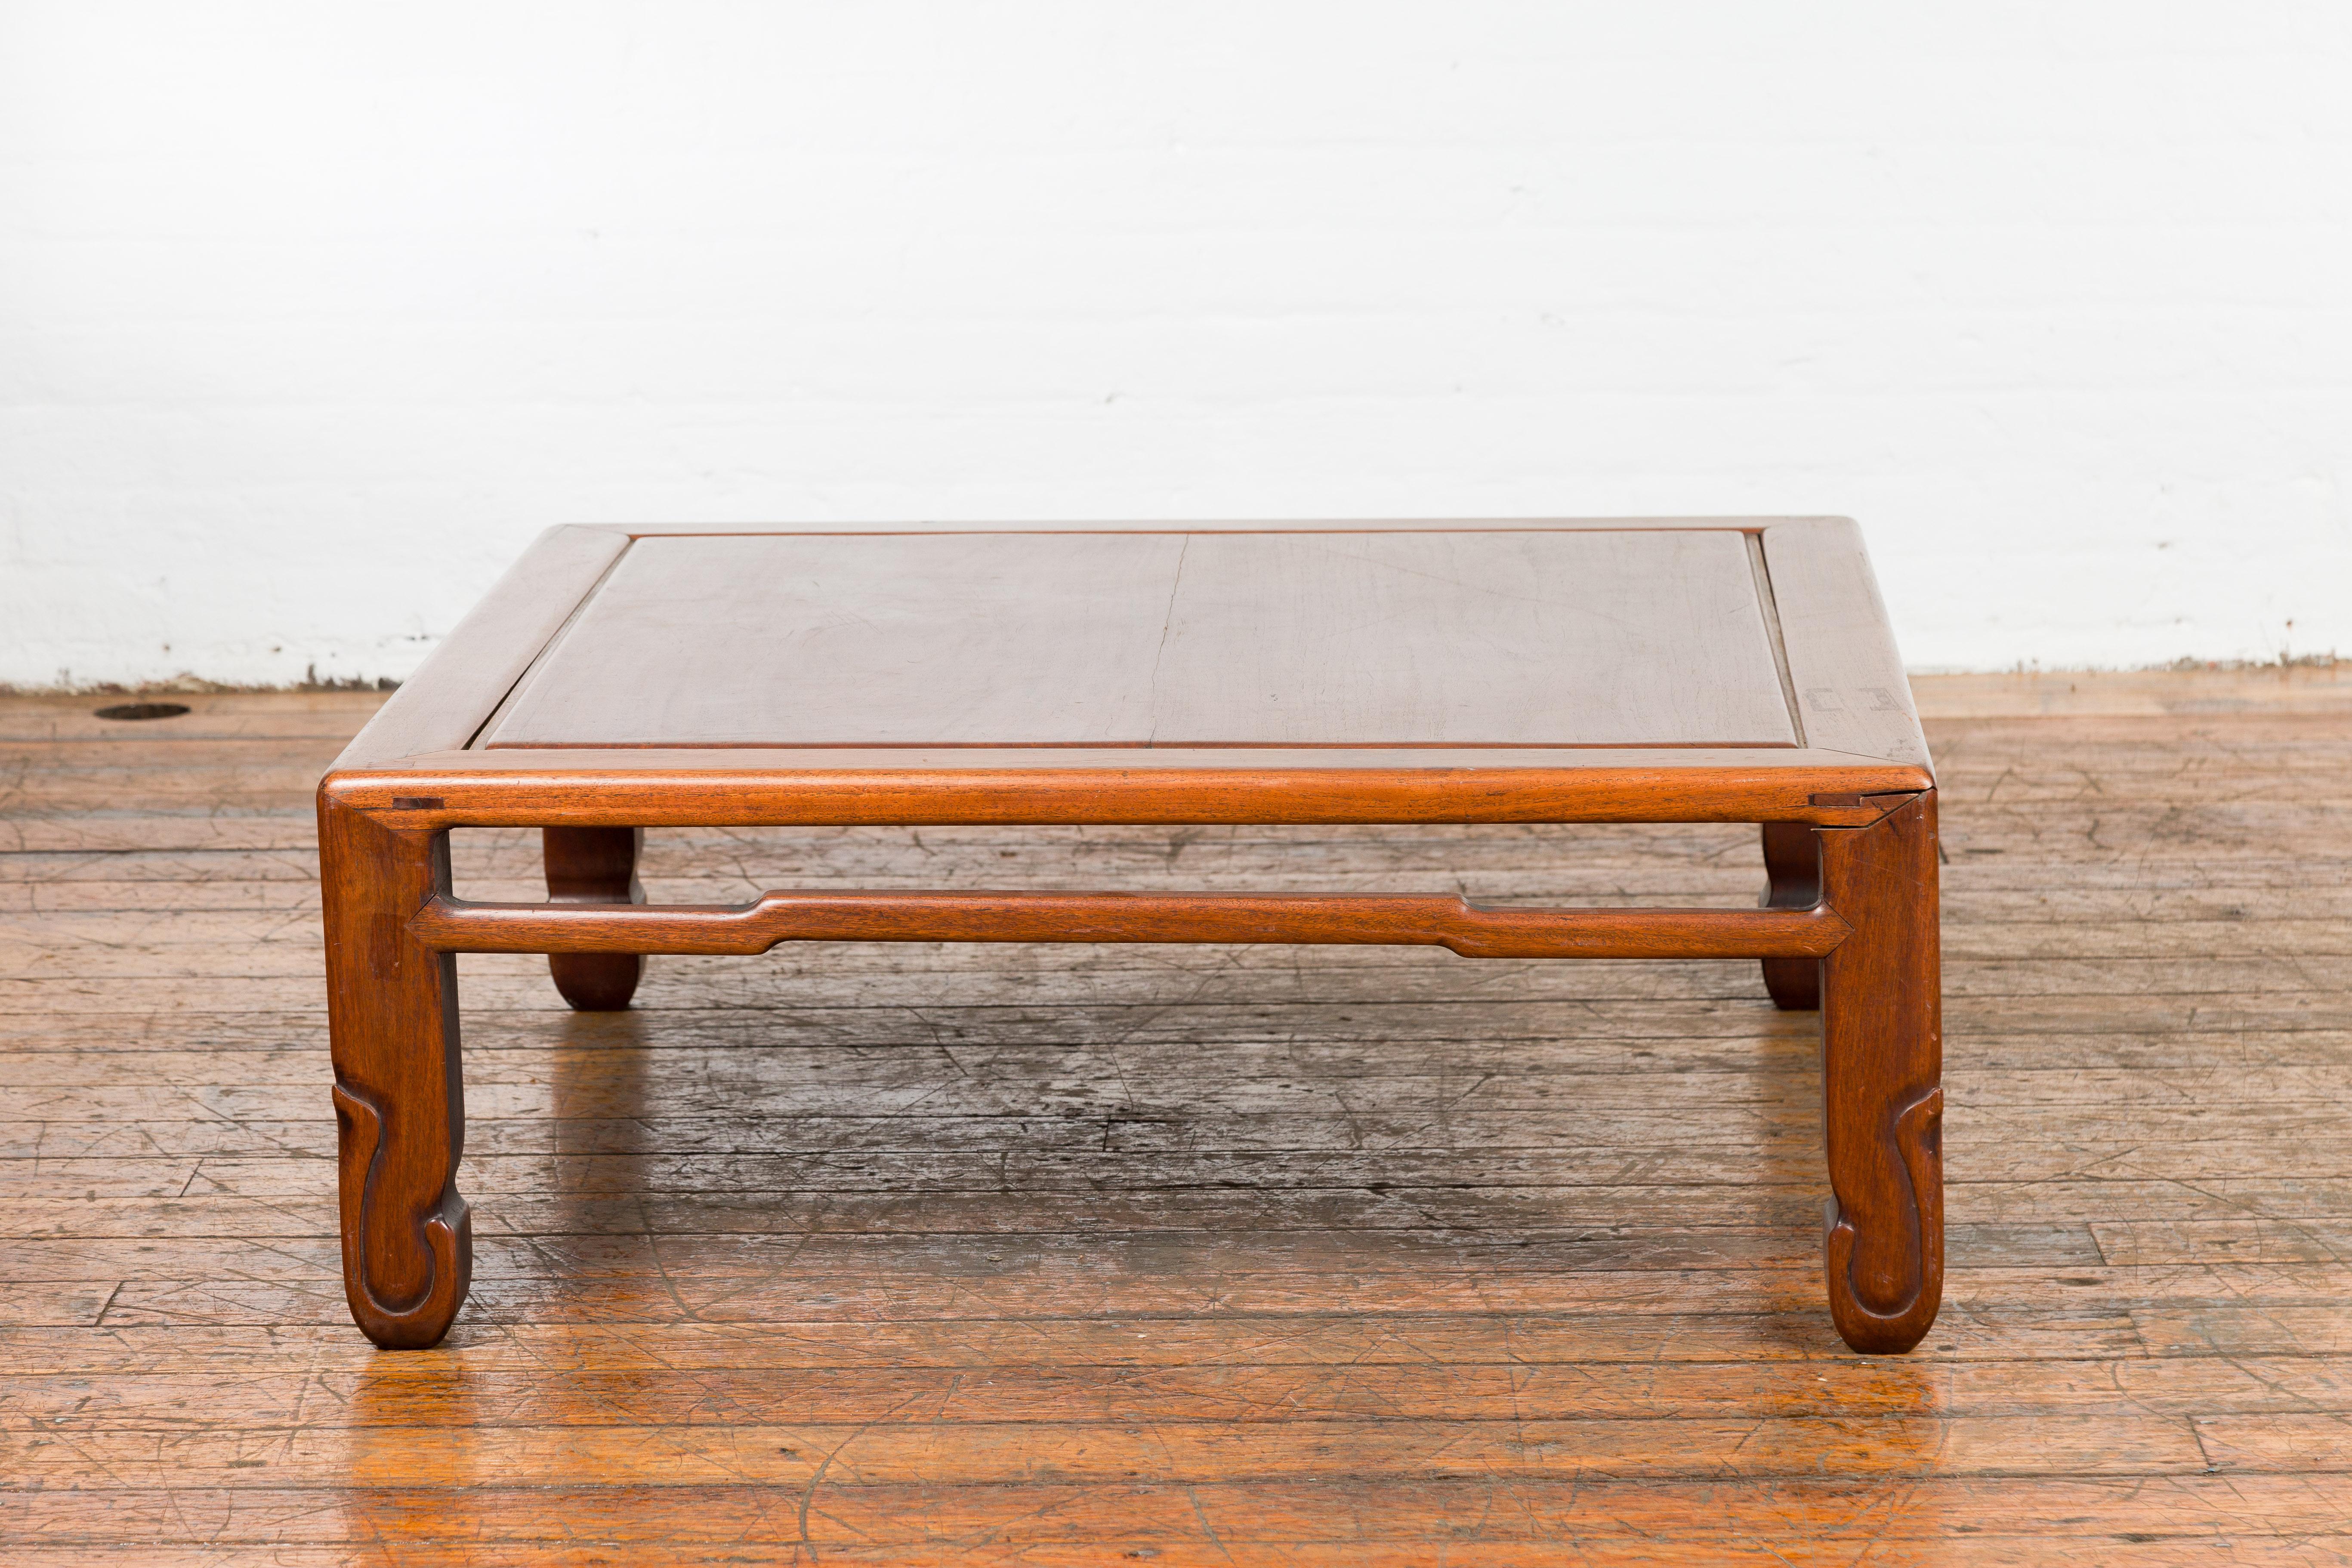 19th Century Low Kang Coffee Table with Humpback Stretcher and Horsehoof Feet For Sale 7